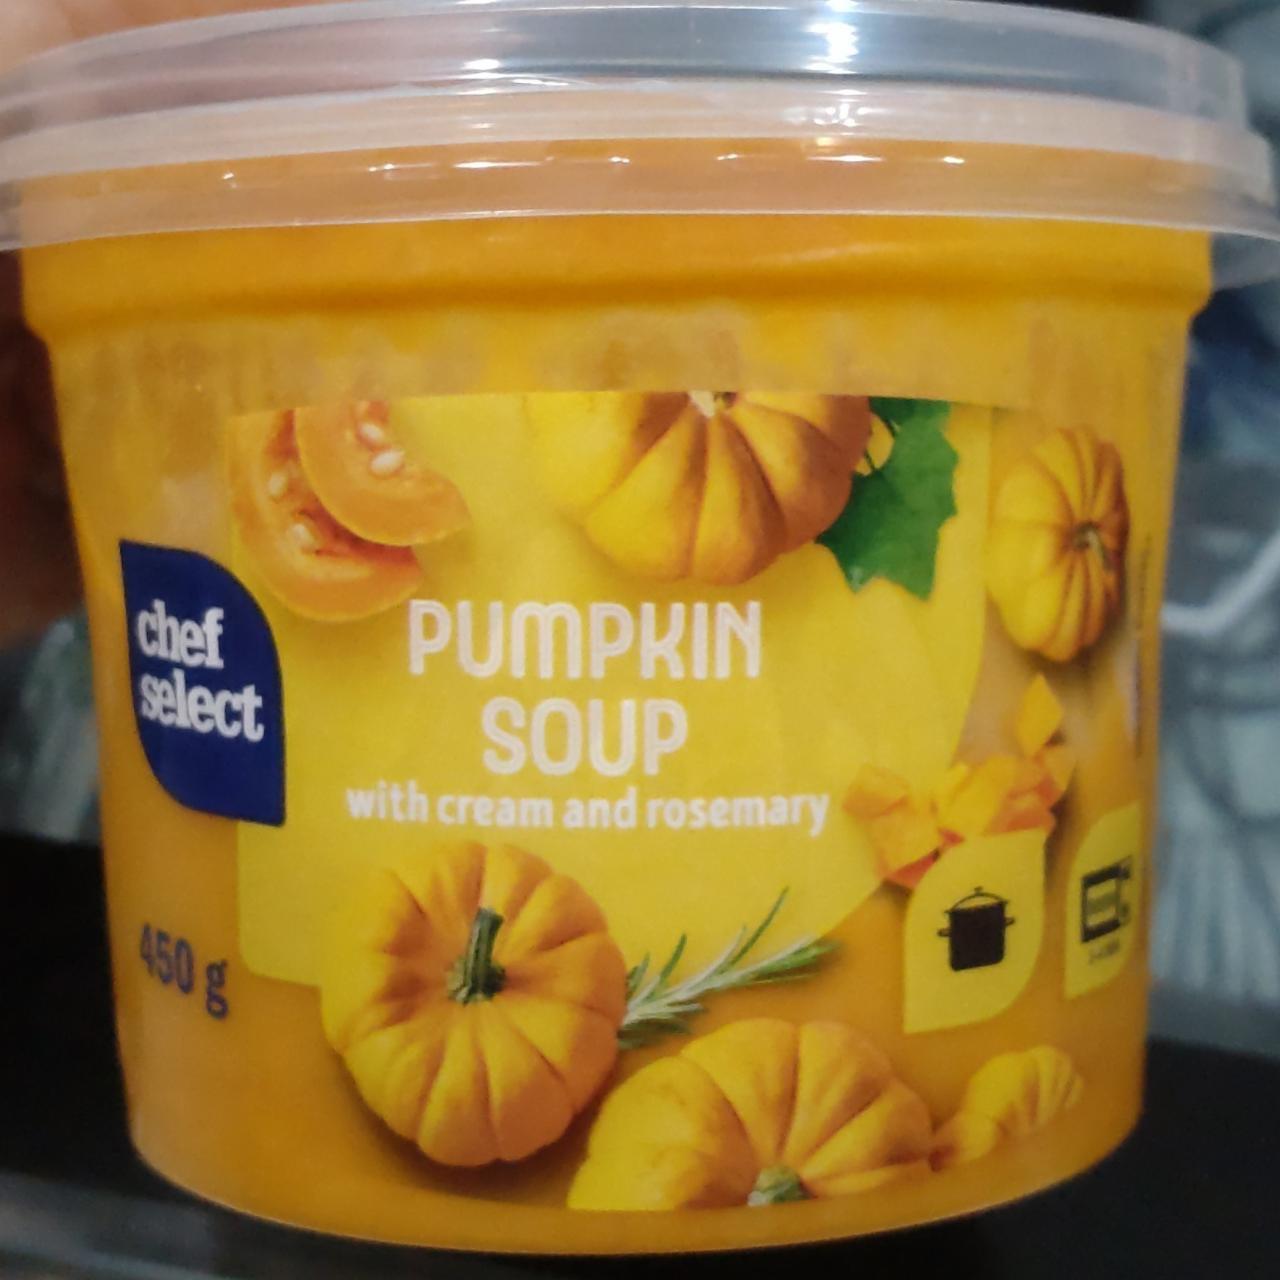 Képek - Pumpkin soup with cream and rosemary Chef select